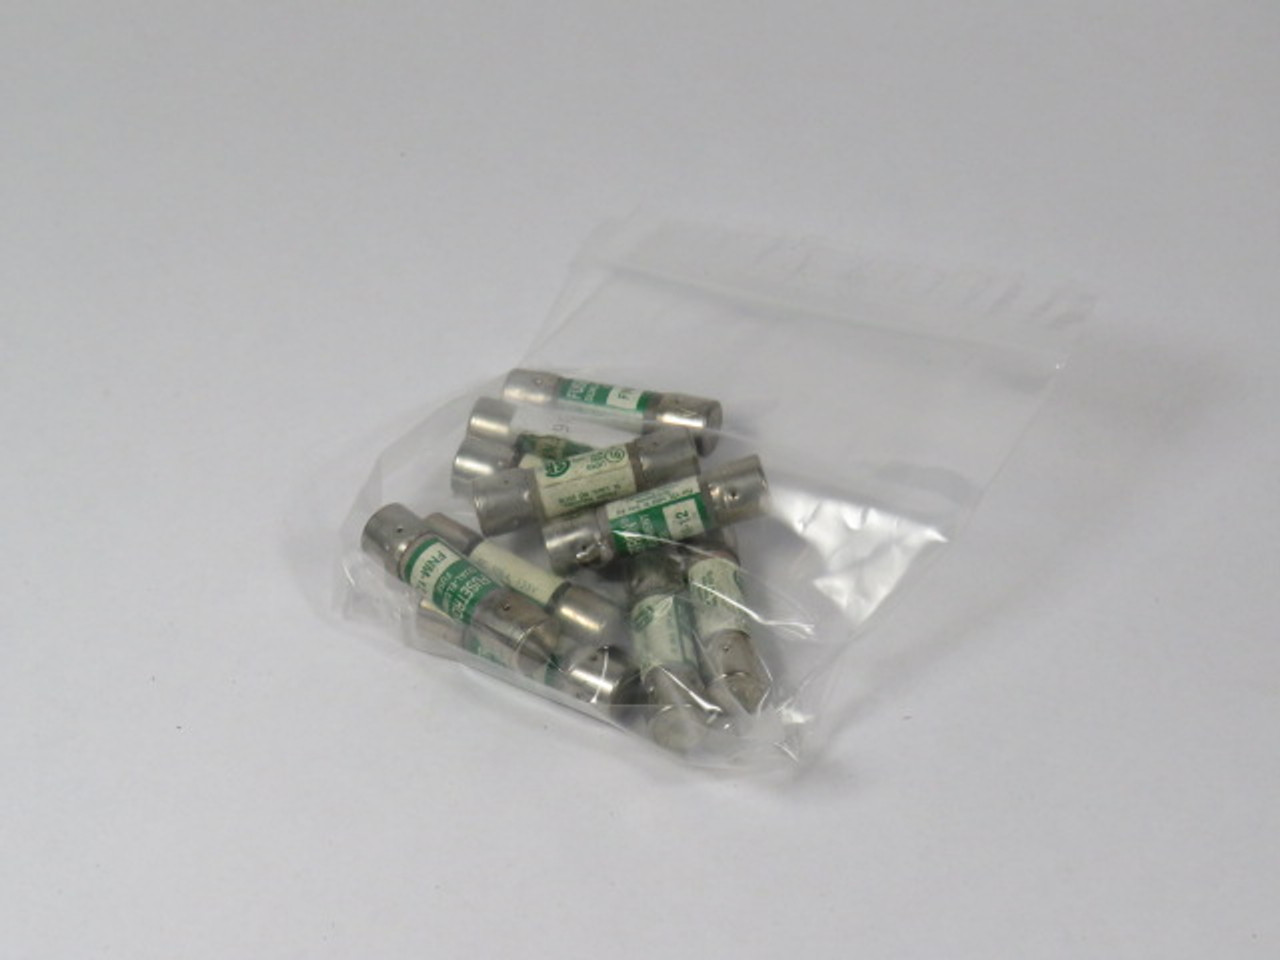 Fusetron FNM-12 Time Delay Fuse 12A 250V Lot of 10 USED